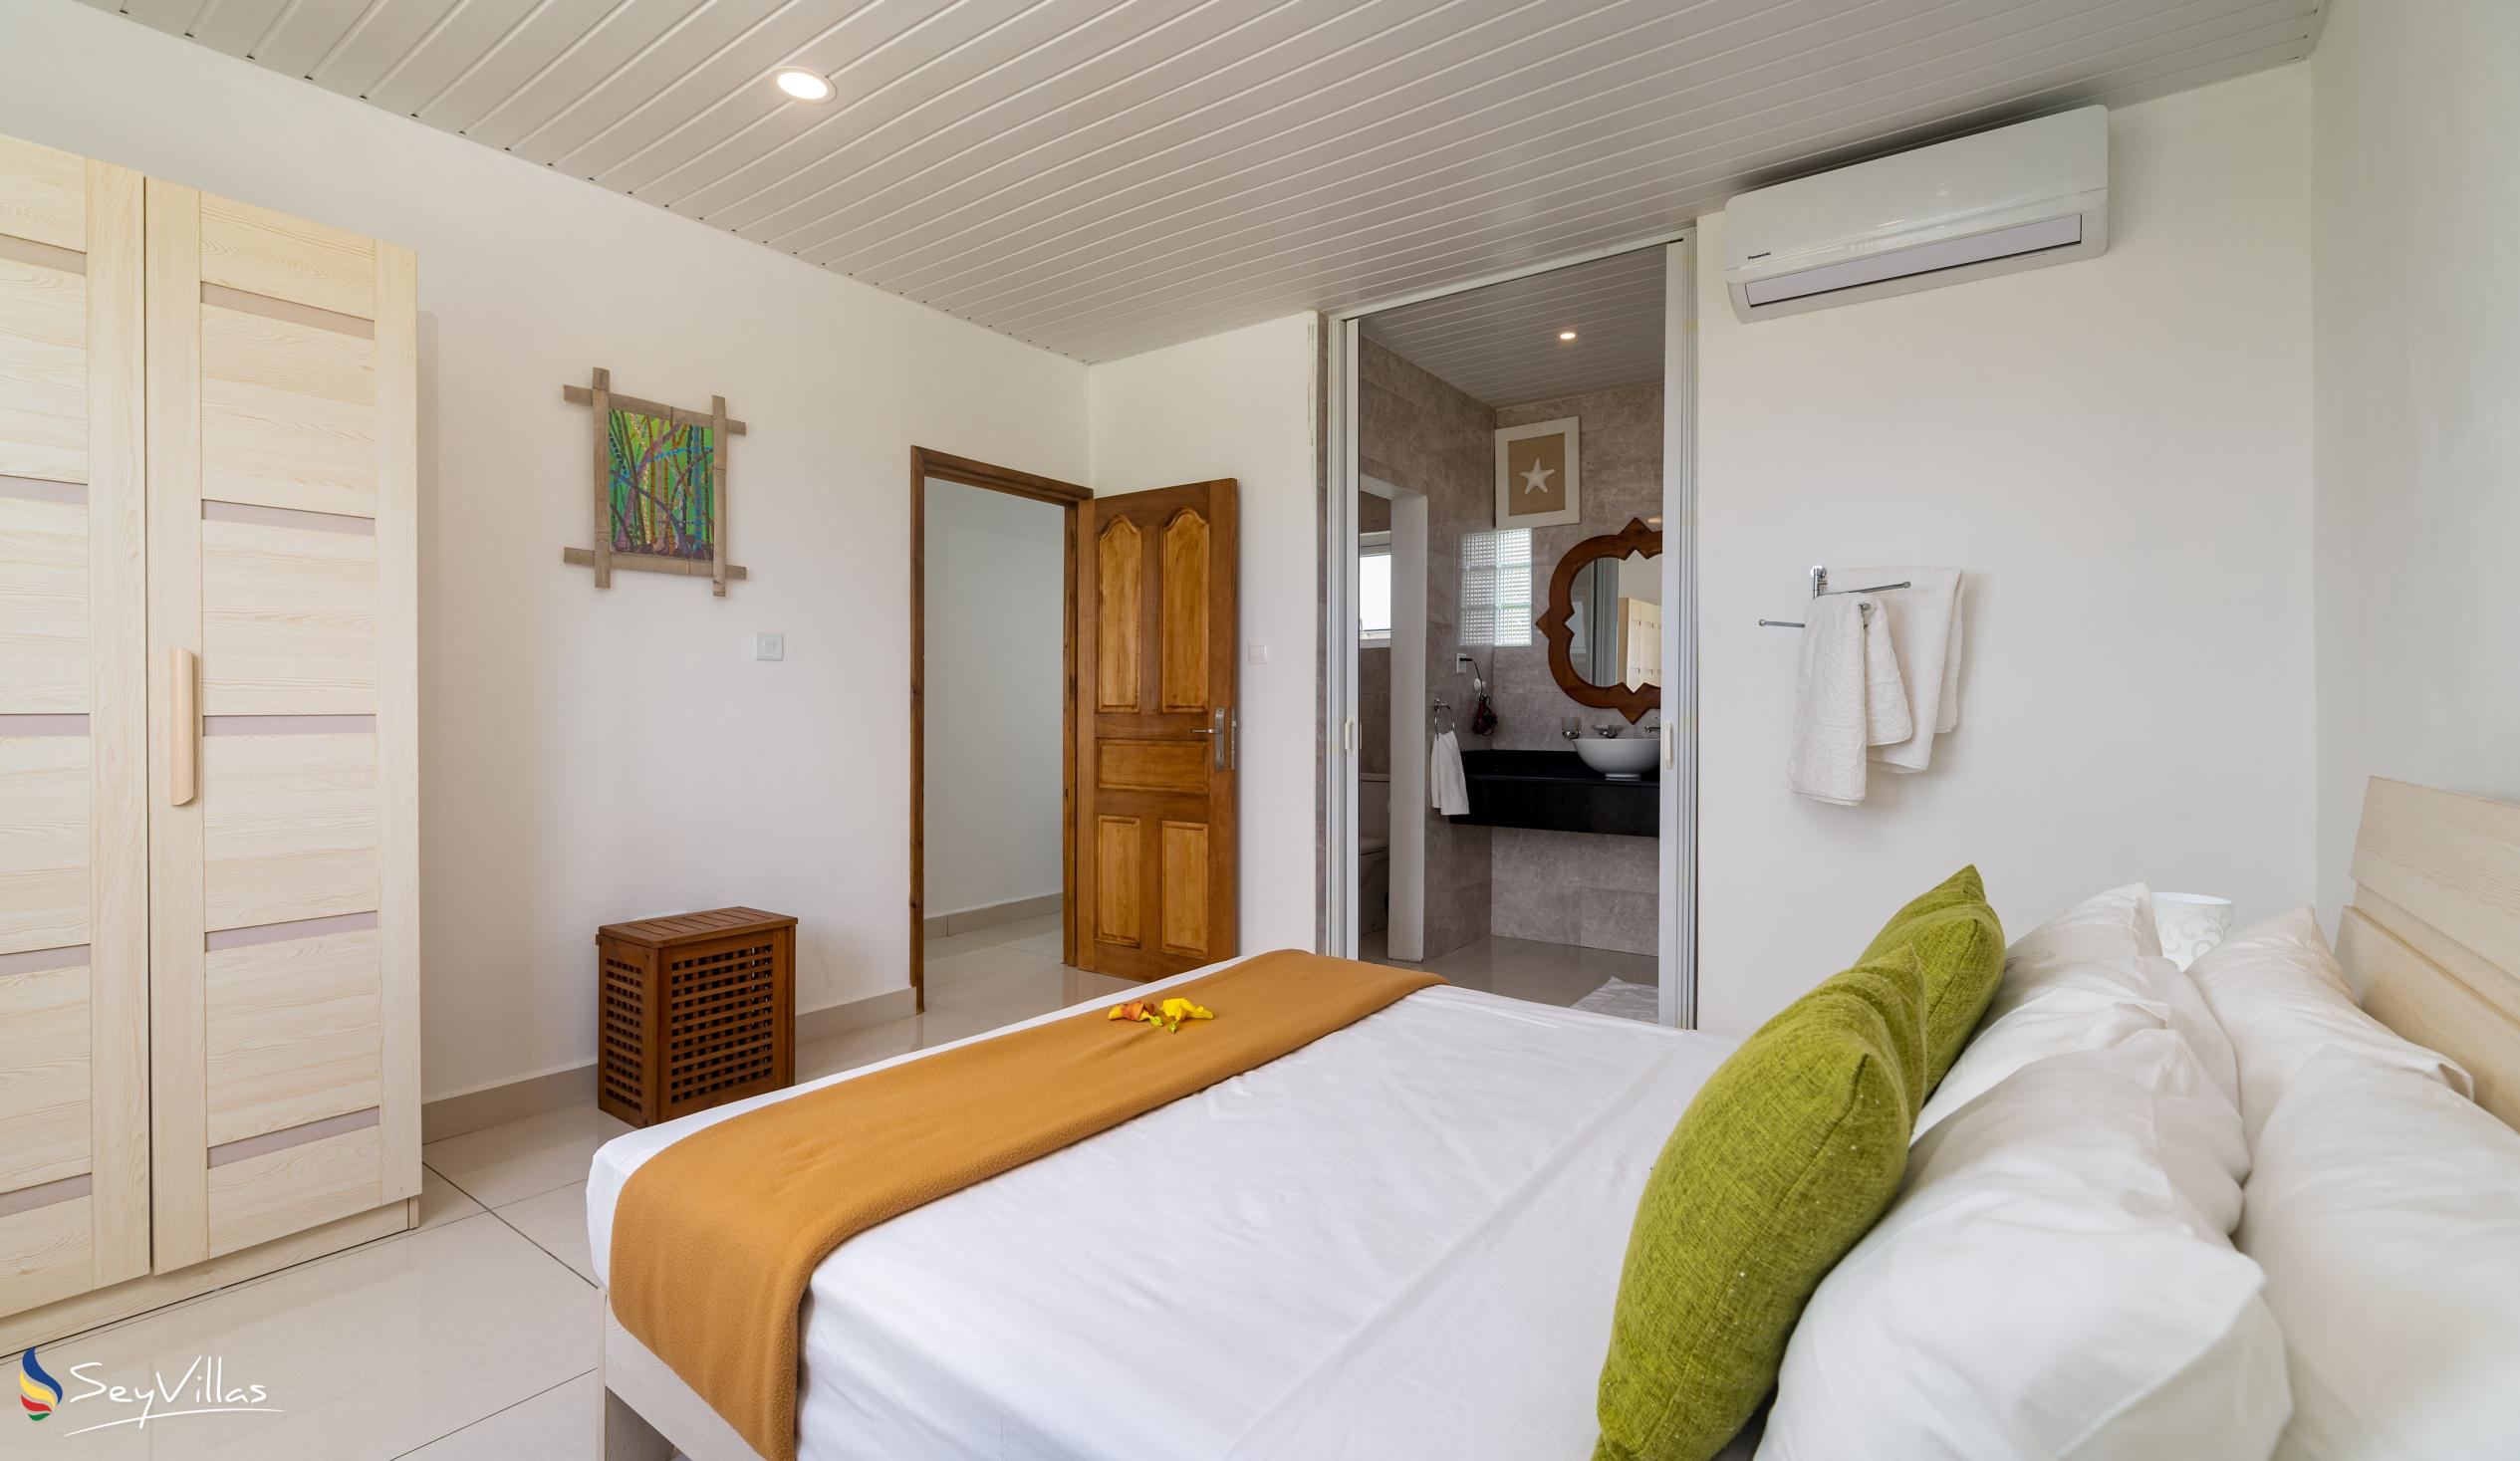 Photo 65: Creole Pearl Self Catering - 1-Bedroom Apartment - Mahé (Seychelles)